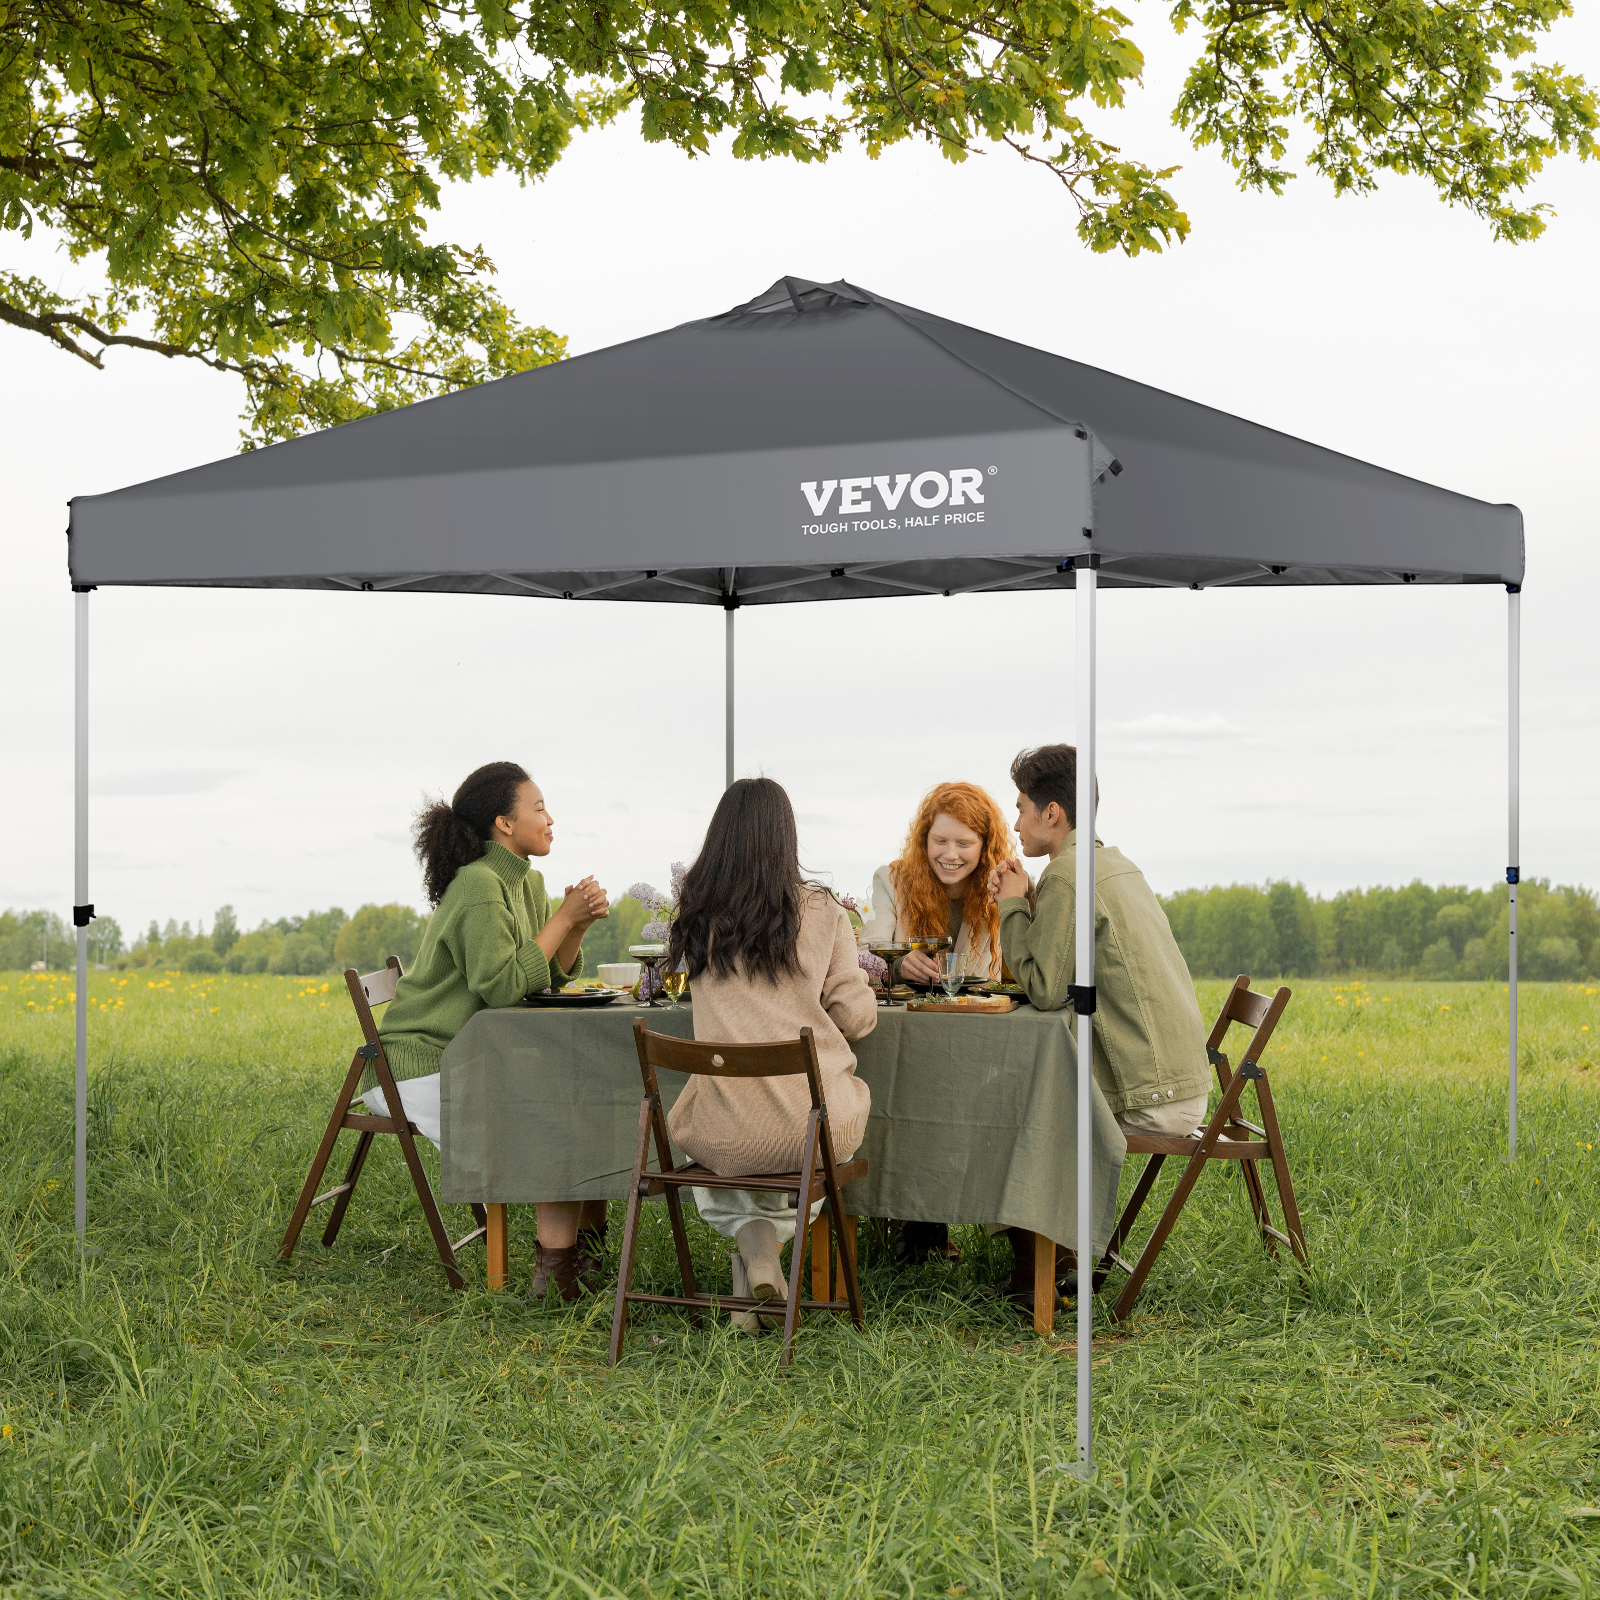 VEVOR Pop Up Canopy Tent, 10 x 10 ft, 250 D PU Silver Coated Tarp, with Portable Roller Bag and 4 Sandbags, Waterproof and Sun Shelter Gazebo for